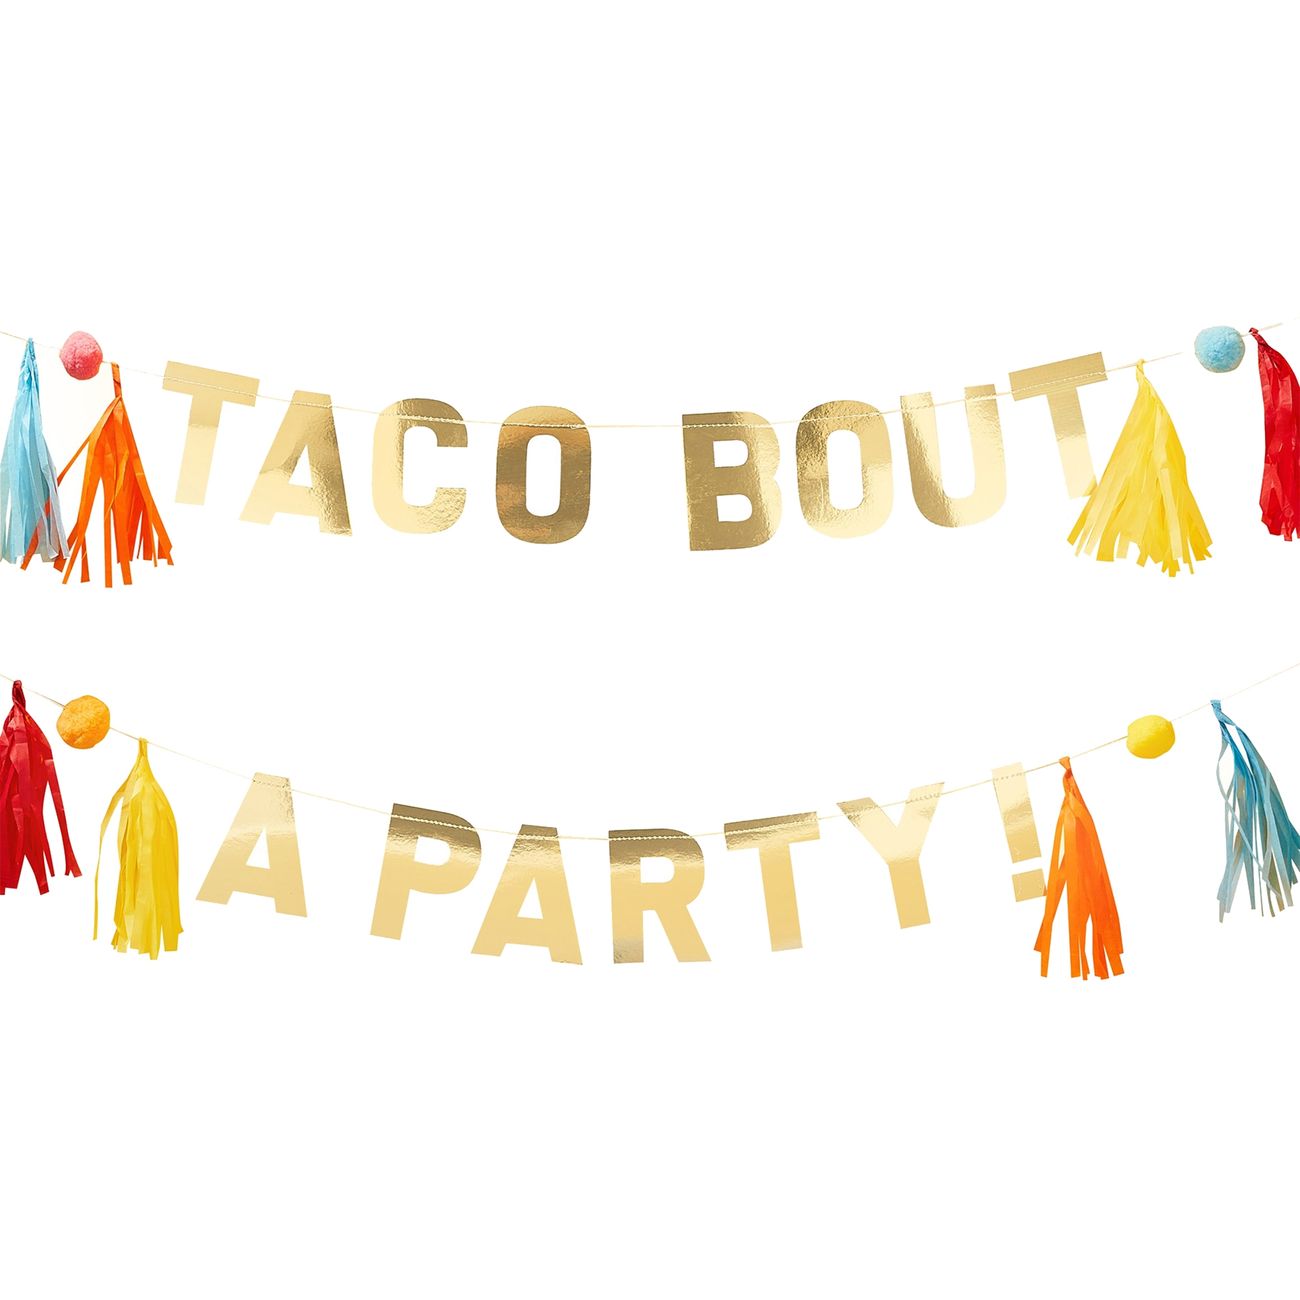 girlang-taco-bout-a-party-85230-1